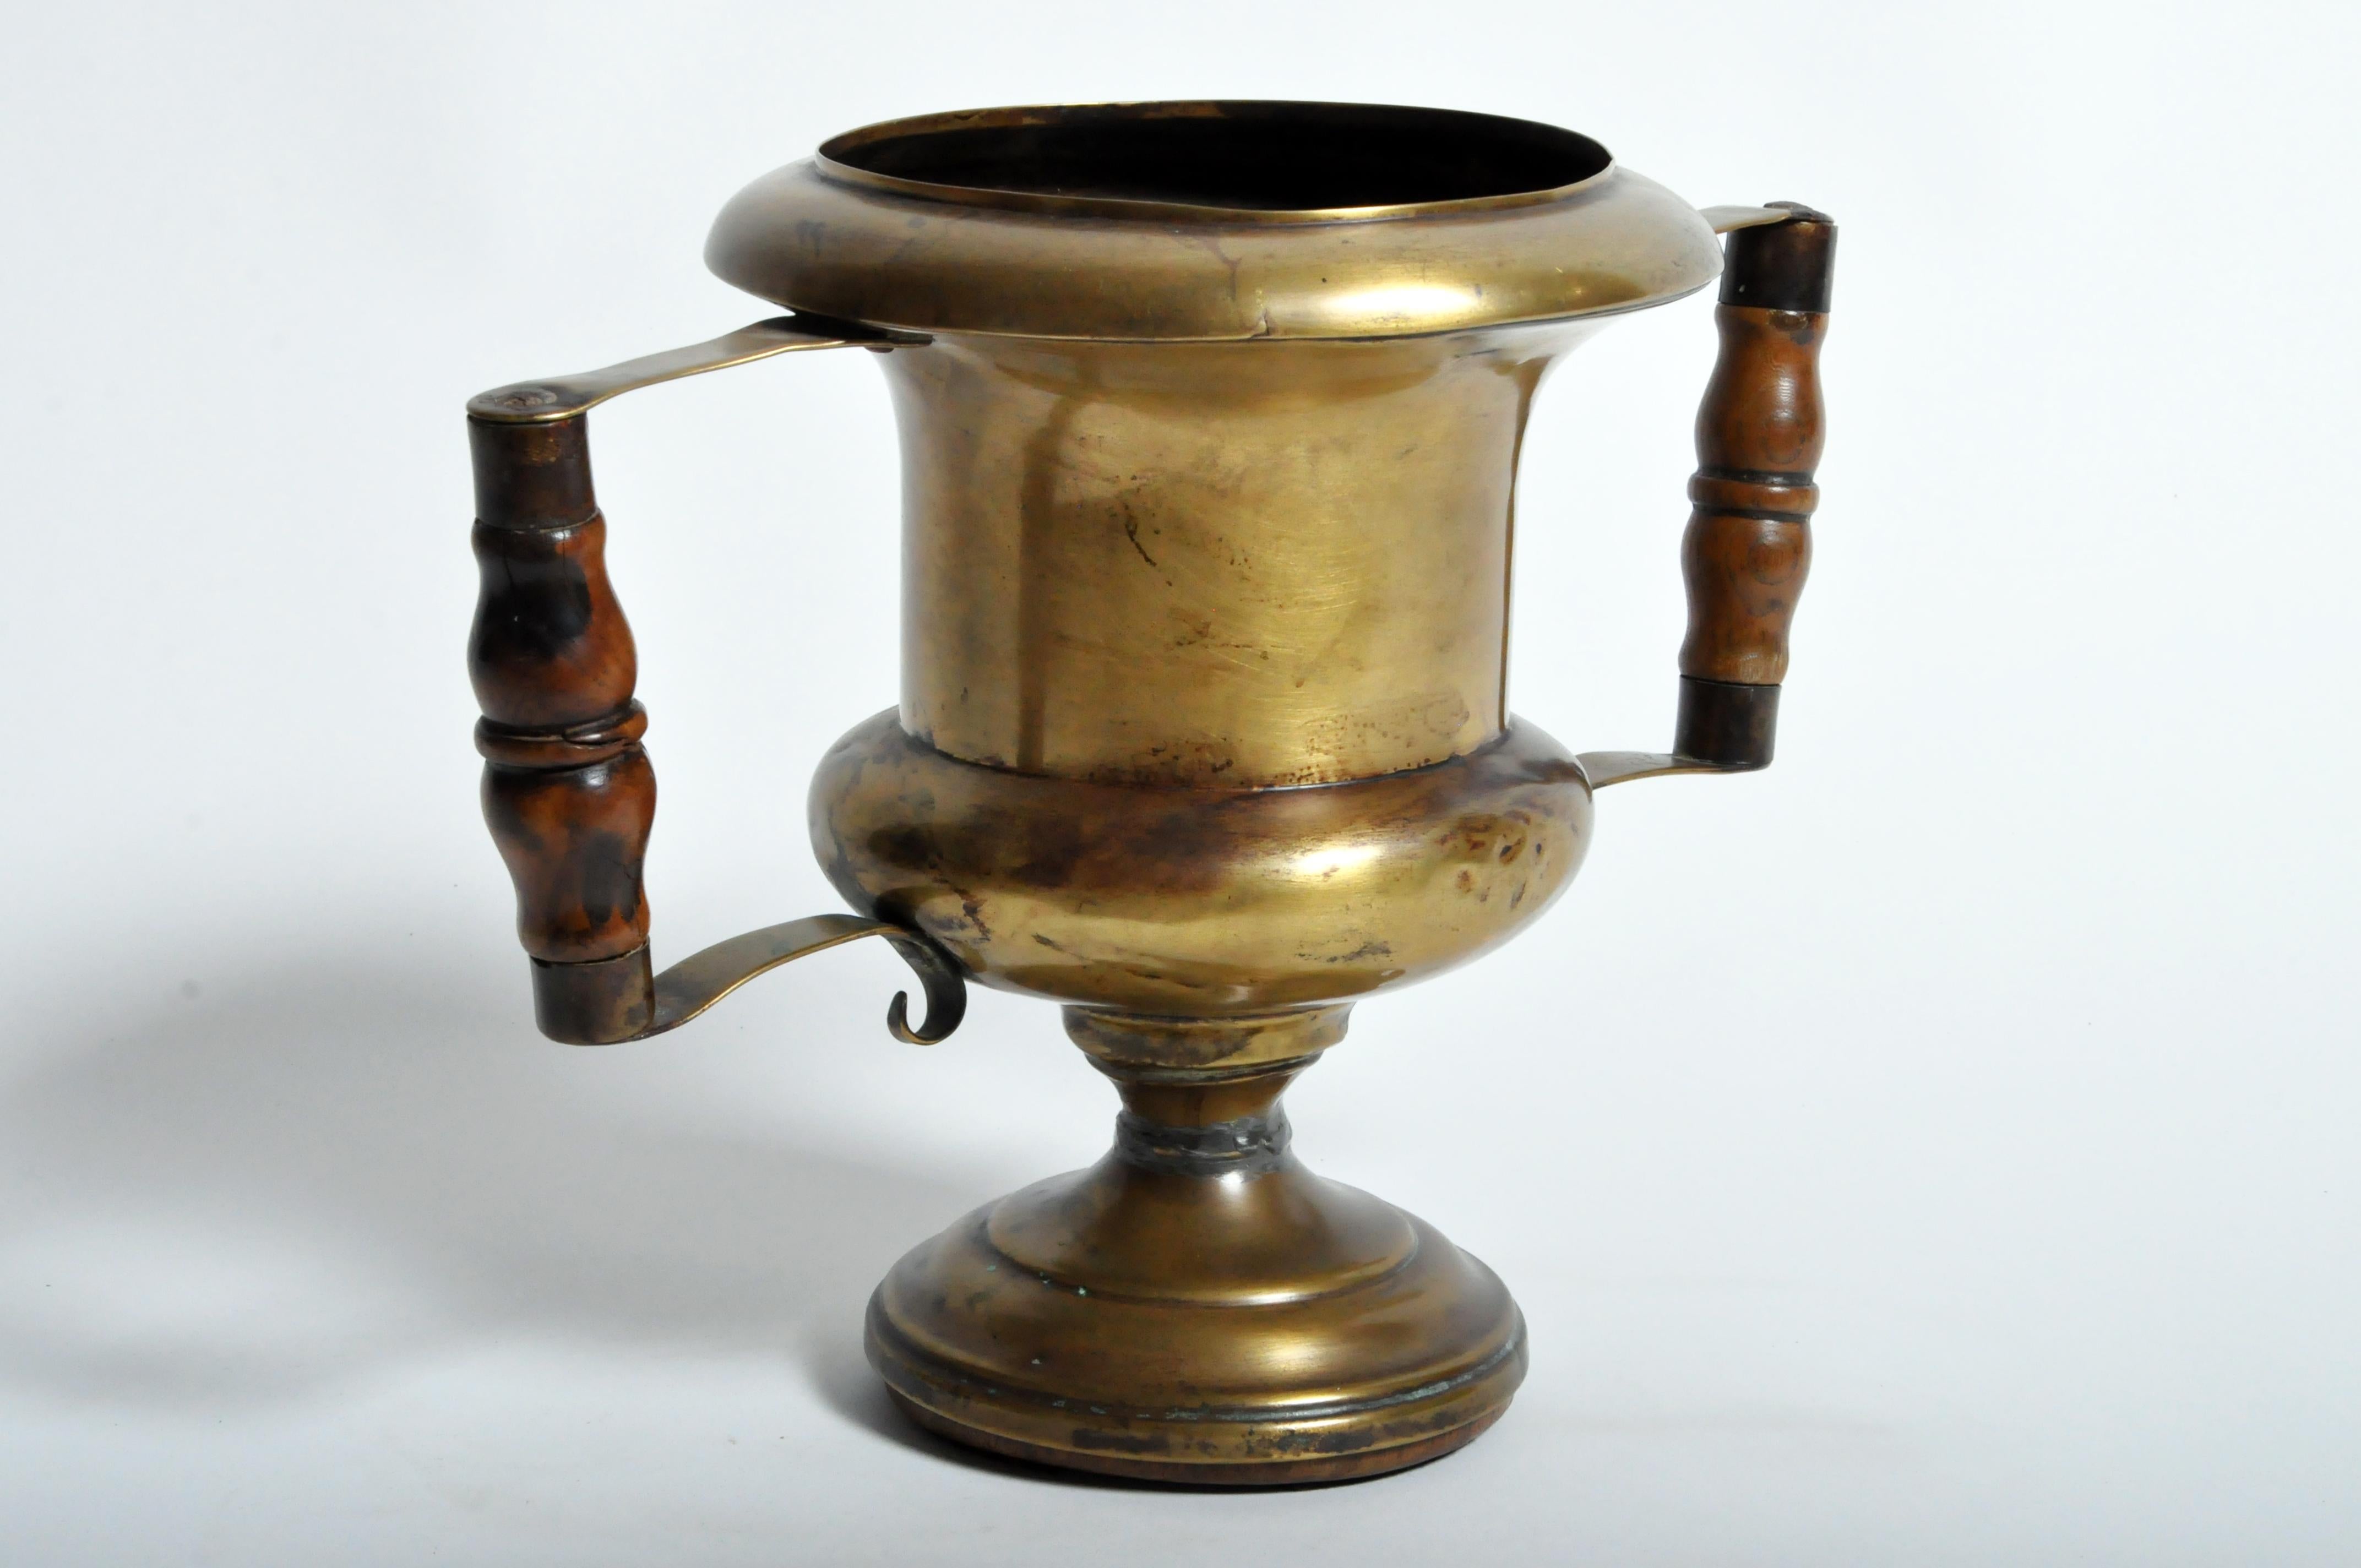 This cup is from France and was made from brass and oakwood, circa 1900.